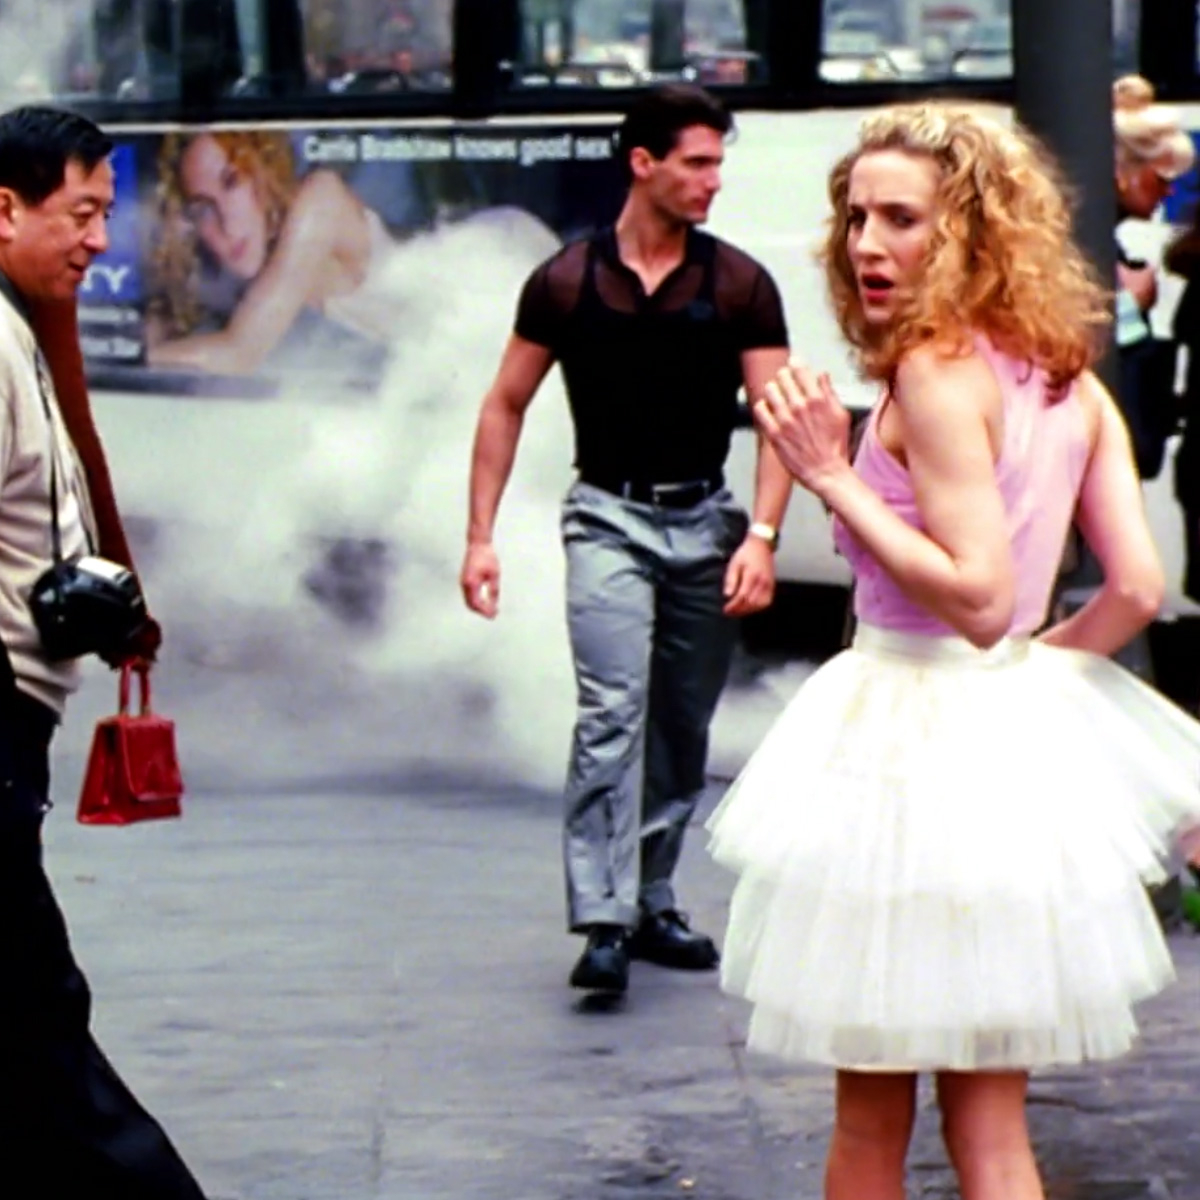 Sex and the City and Carrie Bradshaw: A Style Evolution With A Question To  Ponder In The End